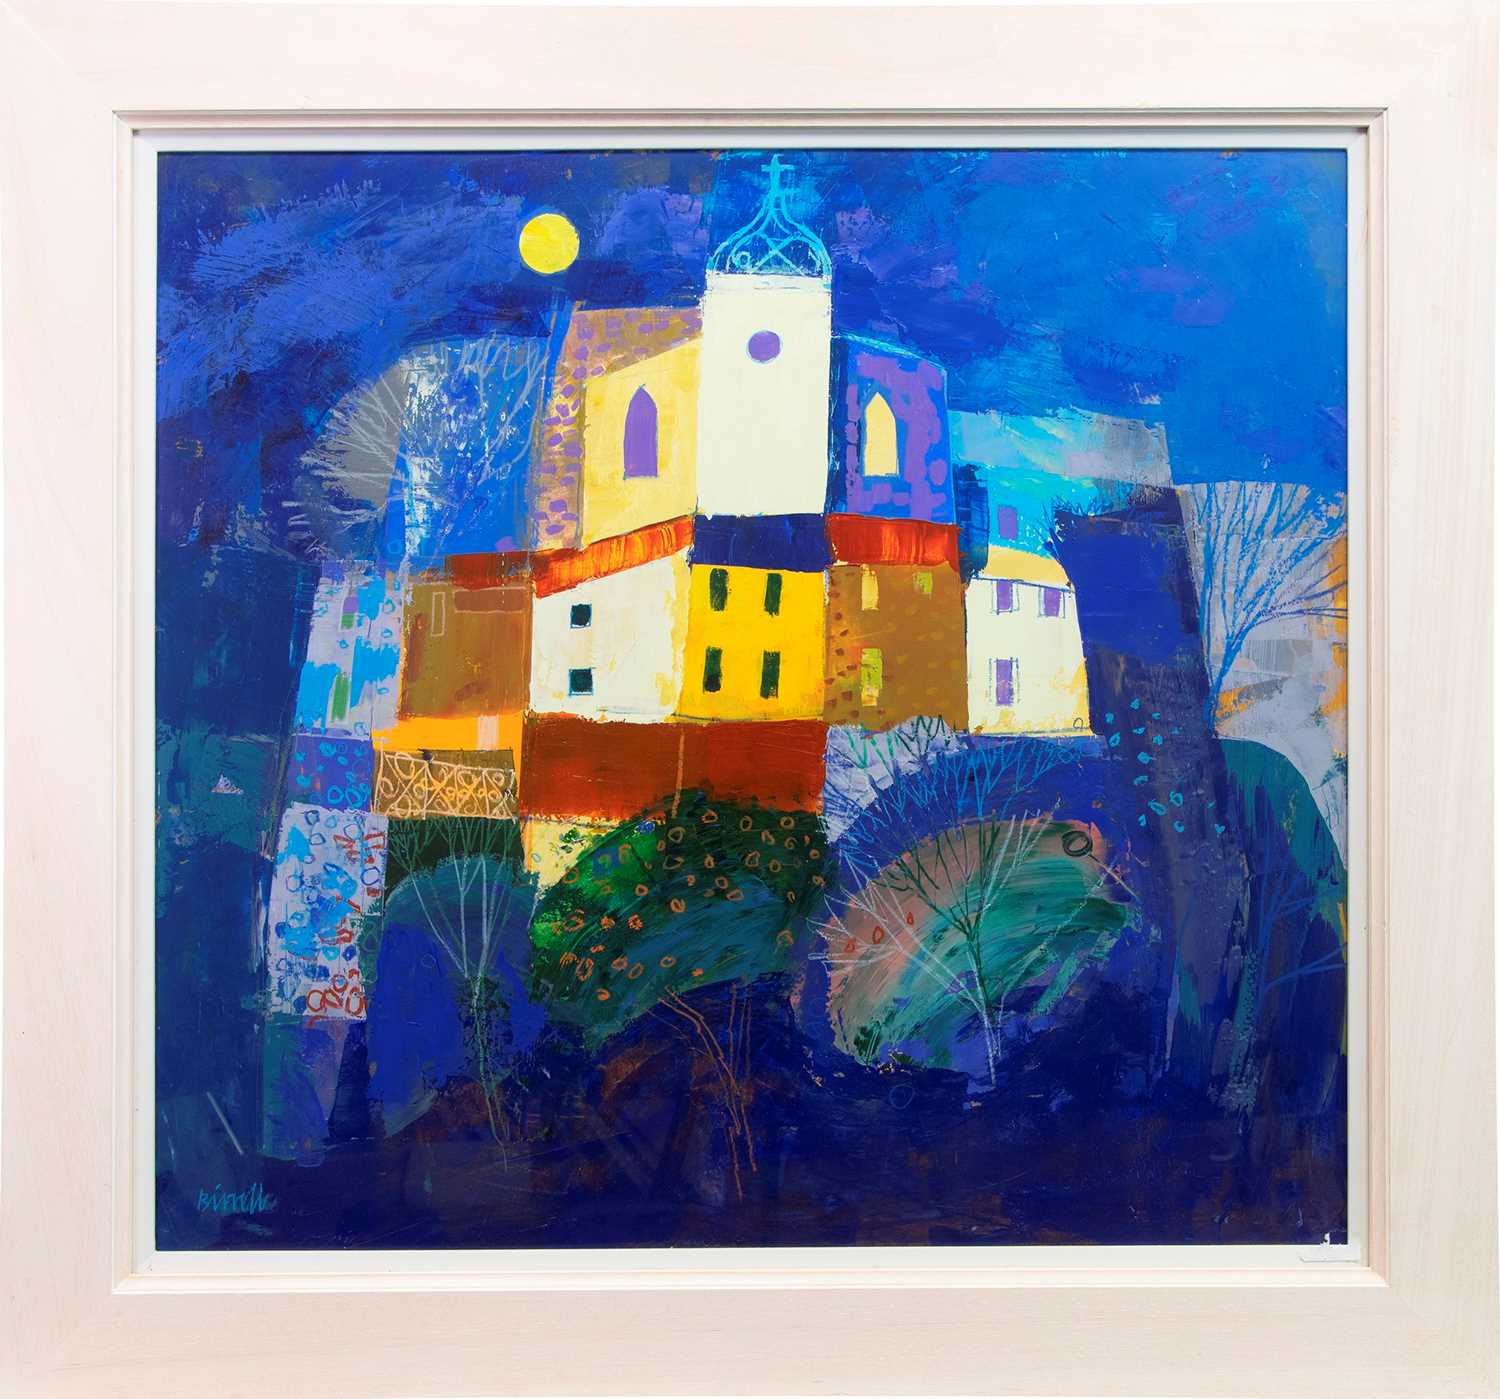 Lot 535 - VILLAGE PERCHE AND MOON, A MIXED MEDIA BY GEORGE BIRRELL